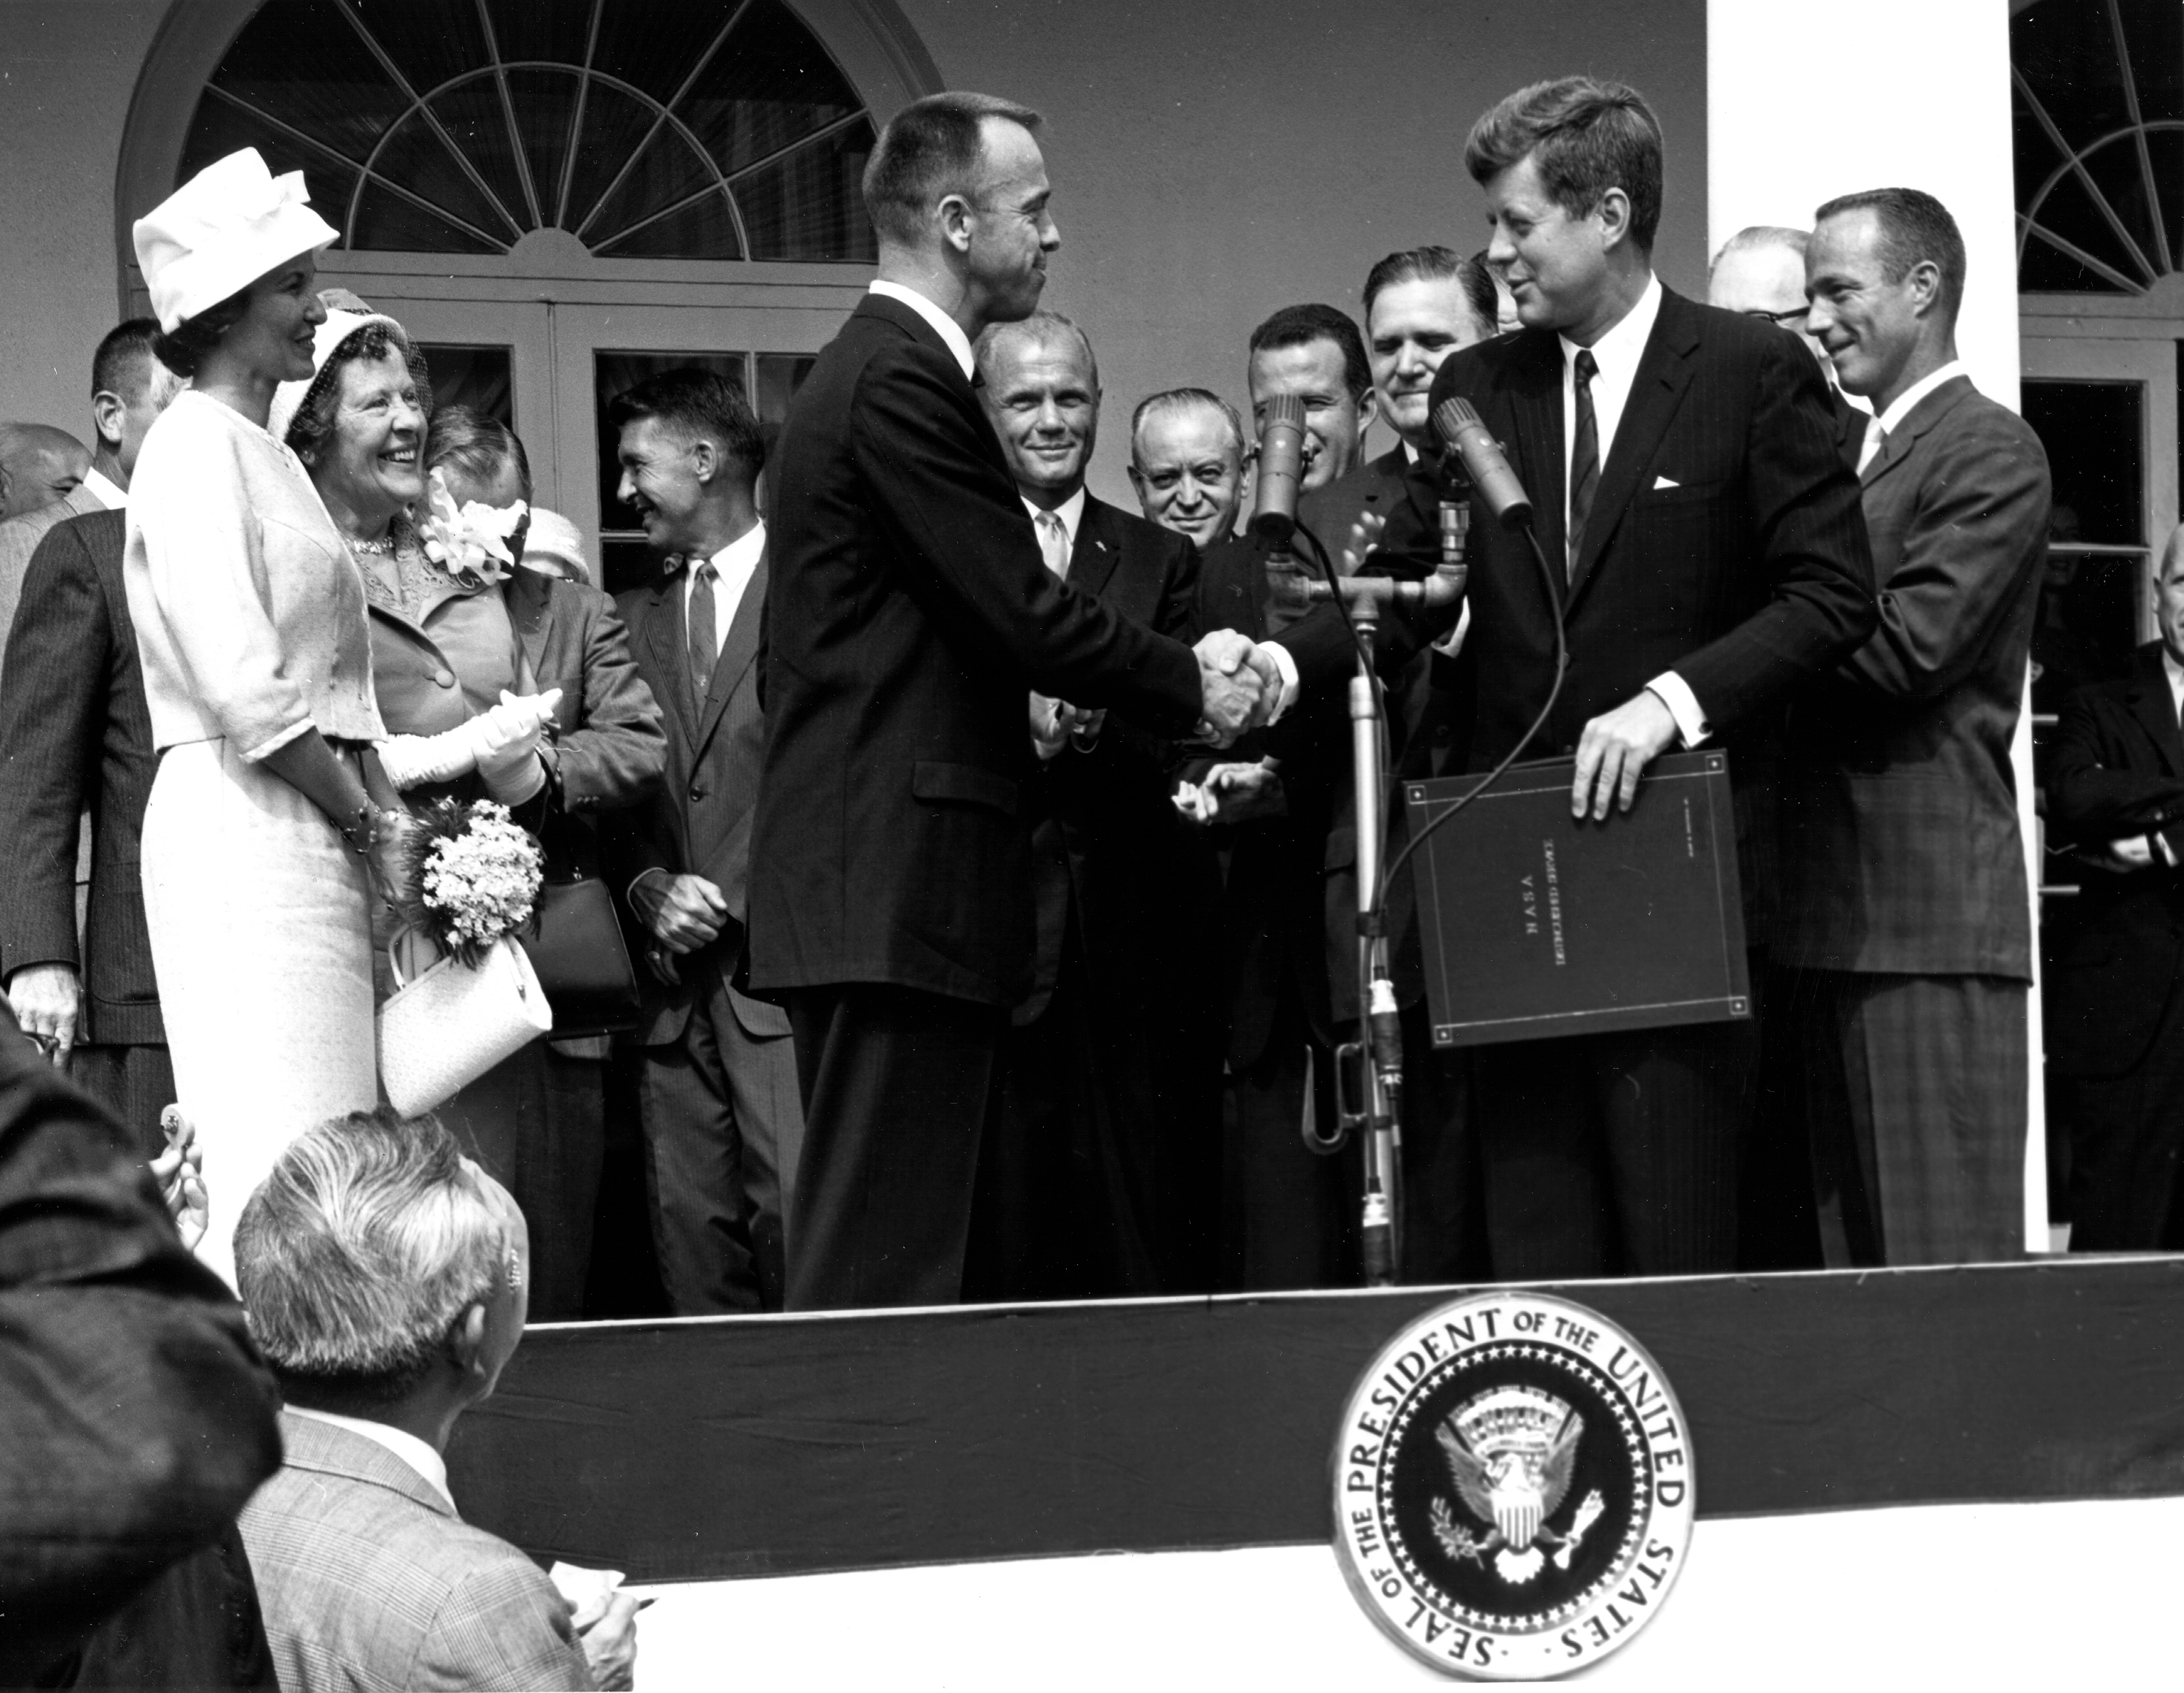 Kennedy and Shepard in Washington D.C. - GPN-2000-001659 - President John F. Kennedy congratulates astronaut Alan B. Shepard, Jr., the first American in space, on his historic May 5th, 1961 ride in the Freedom 7 spacecraft and presents him with the NASA Distinguished Service Award. The ceremony took place on the White House lawn. Shepard's wife, Louise (left in white dress and hat), and his mother were in attendance as well as the other six Mercury astronauts and NASA officals, some visible in the background.